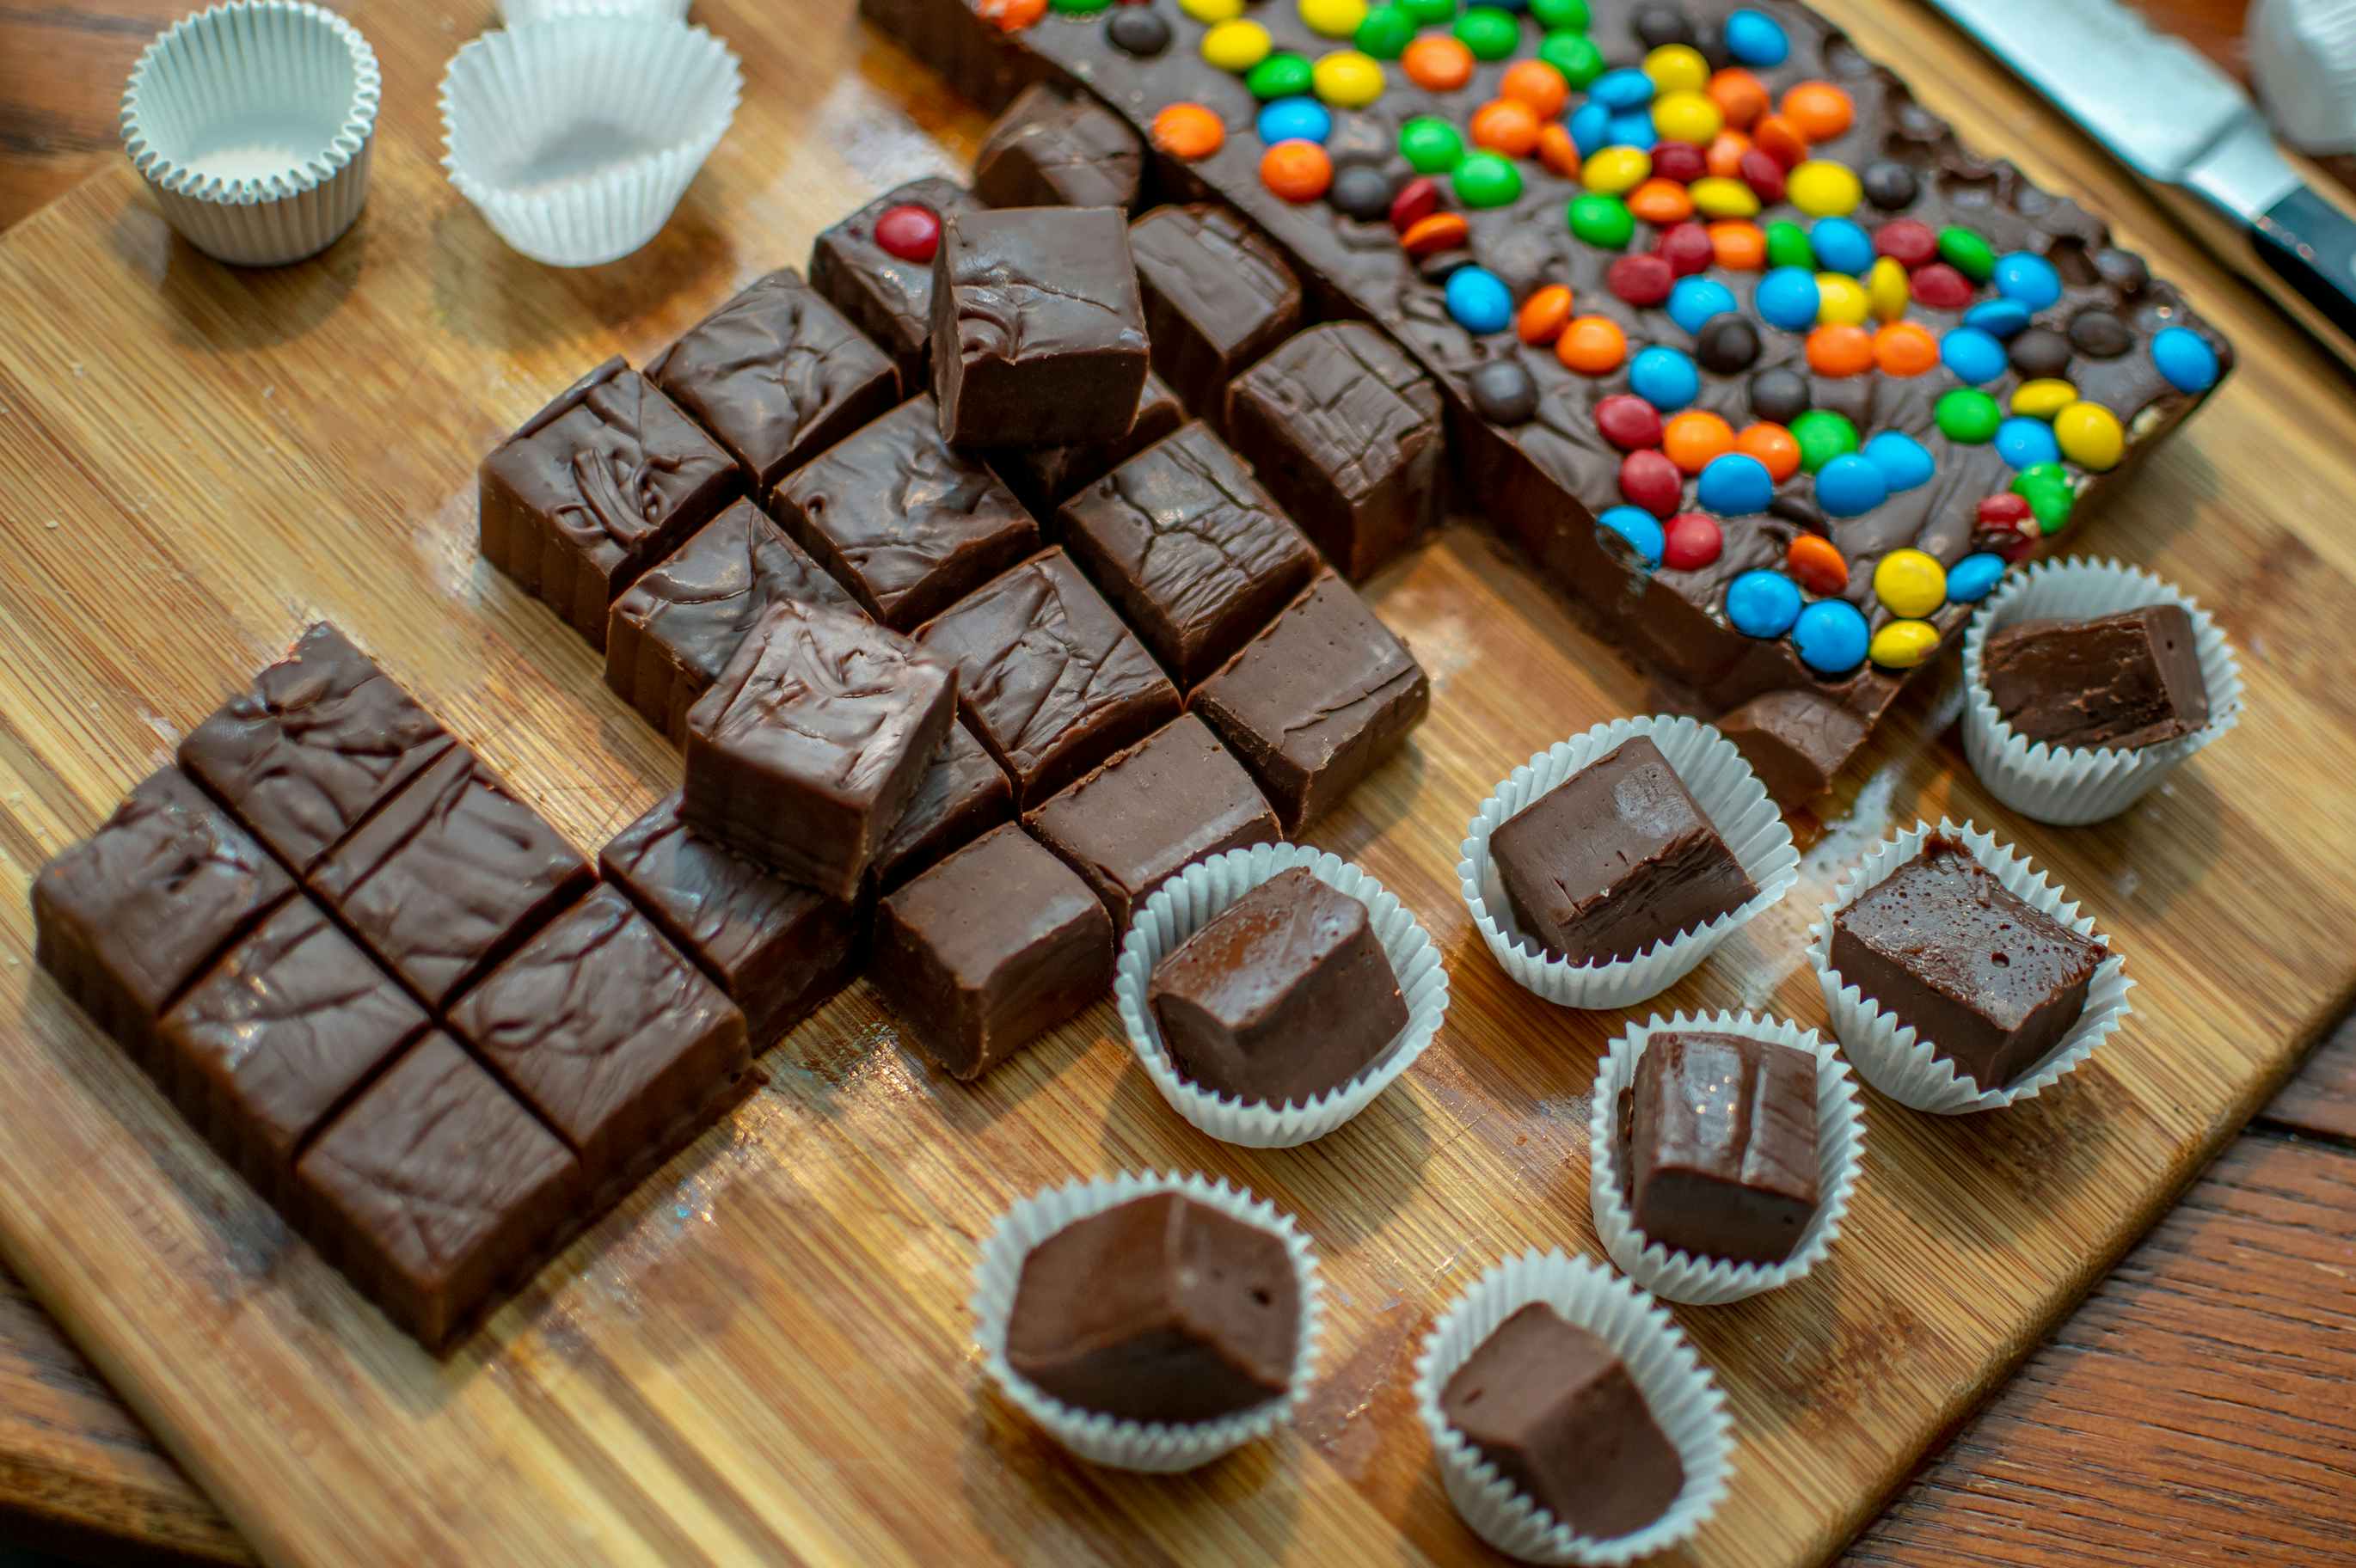 Some homemade chocolate fudge cut into squares next to another fudge with candies on top.